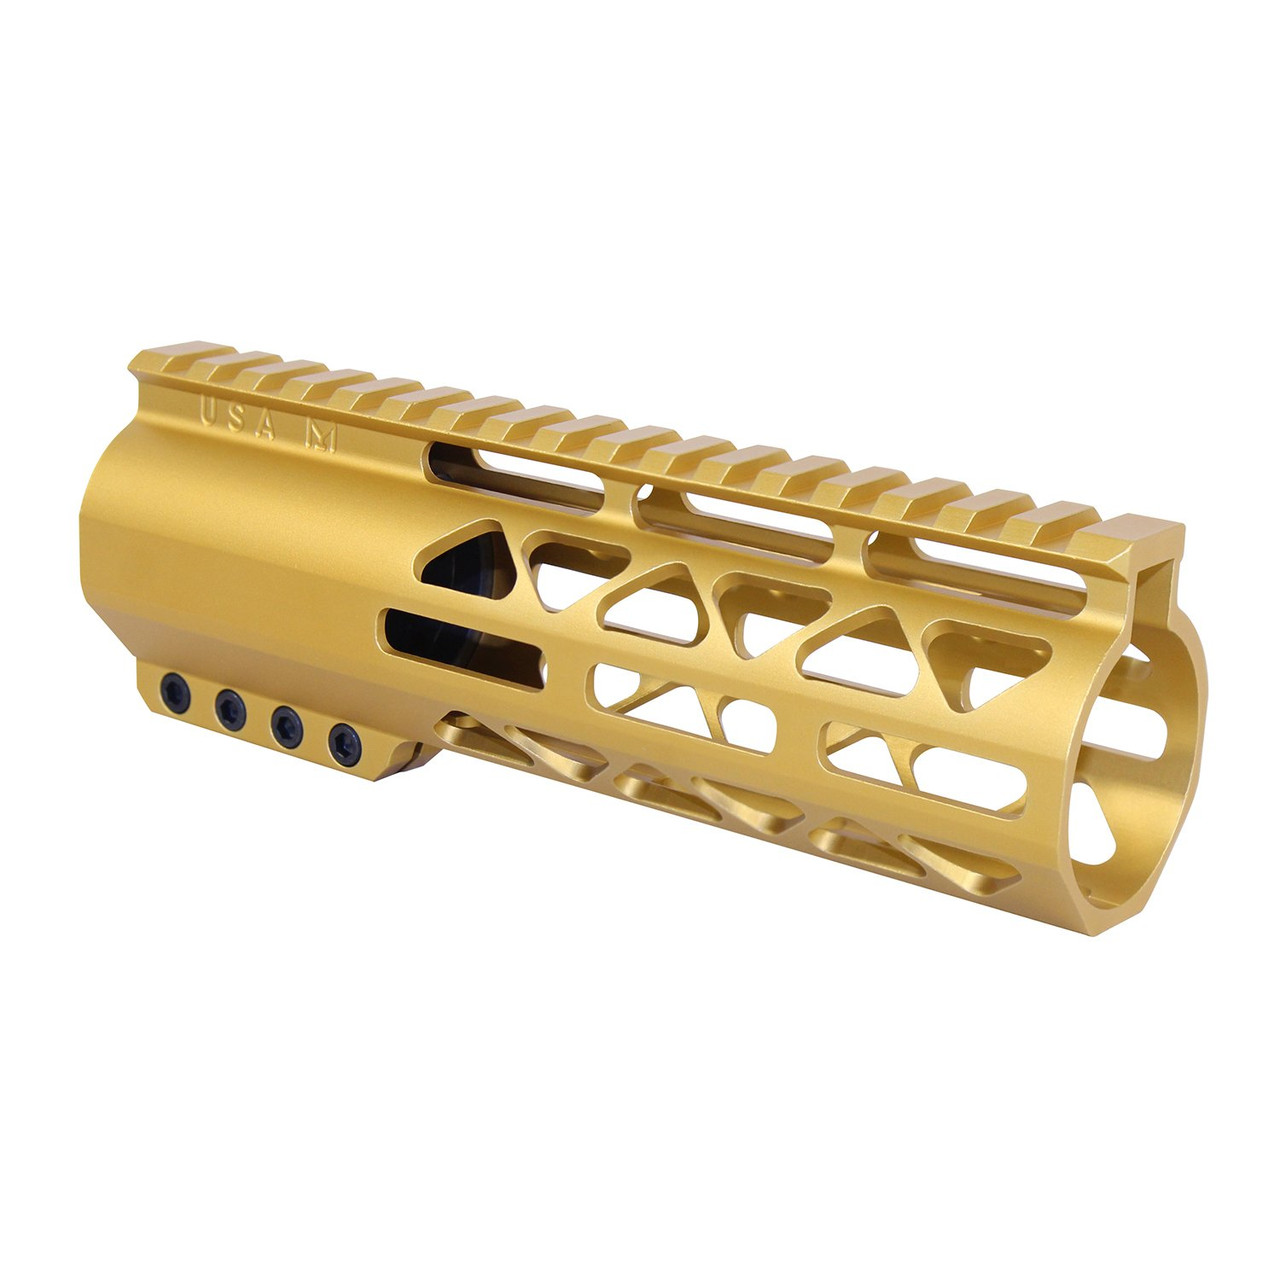 Guntec USA GT-7ALC-308-GOLD 7" AIR-LOK Series M-LOK Compression Free Floating Handguard With Monolithic Top Rail (.308 Cal) (Anodized Gold)